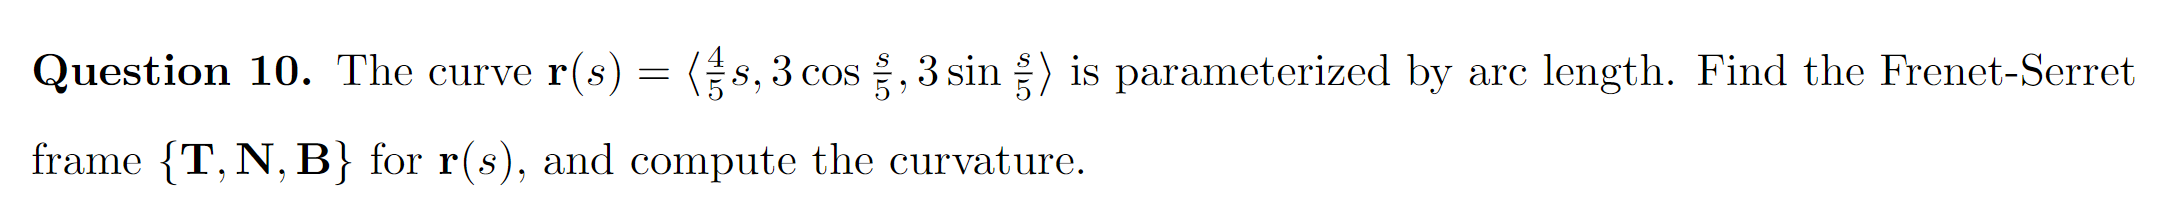 Question 10. The curve r(s) = (s,3 cos , 3 sin ) is parameterized by arc length. Find the Frenet-Serret
frame {T, N, B} for r(s), and compute the curvature.
